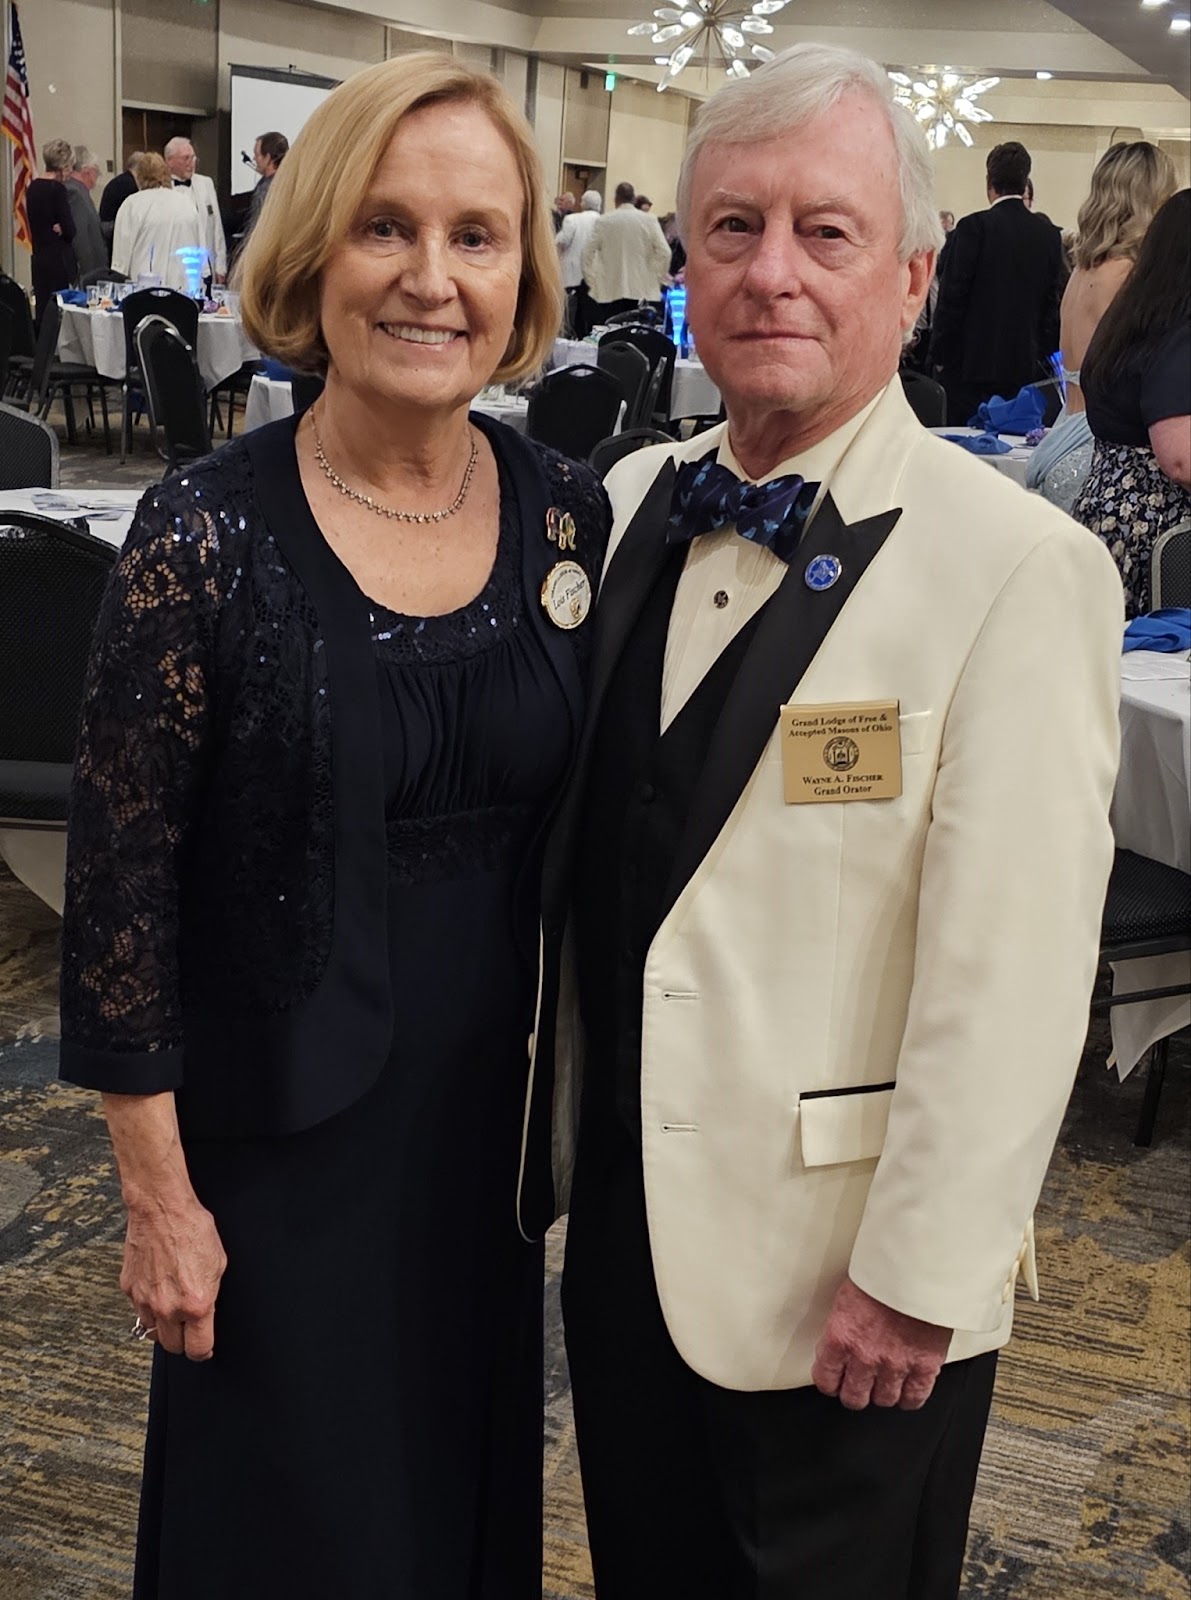 Photograph of Grand Orator and his wife, Teri Fischer in formal wear.